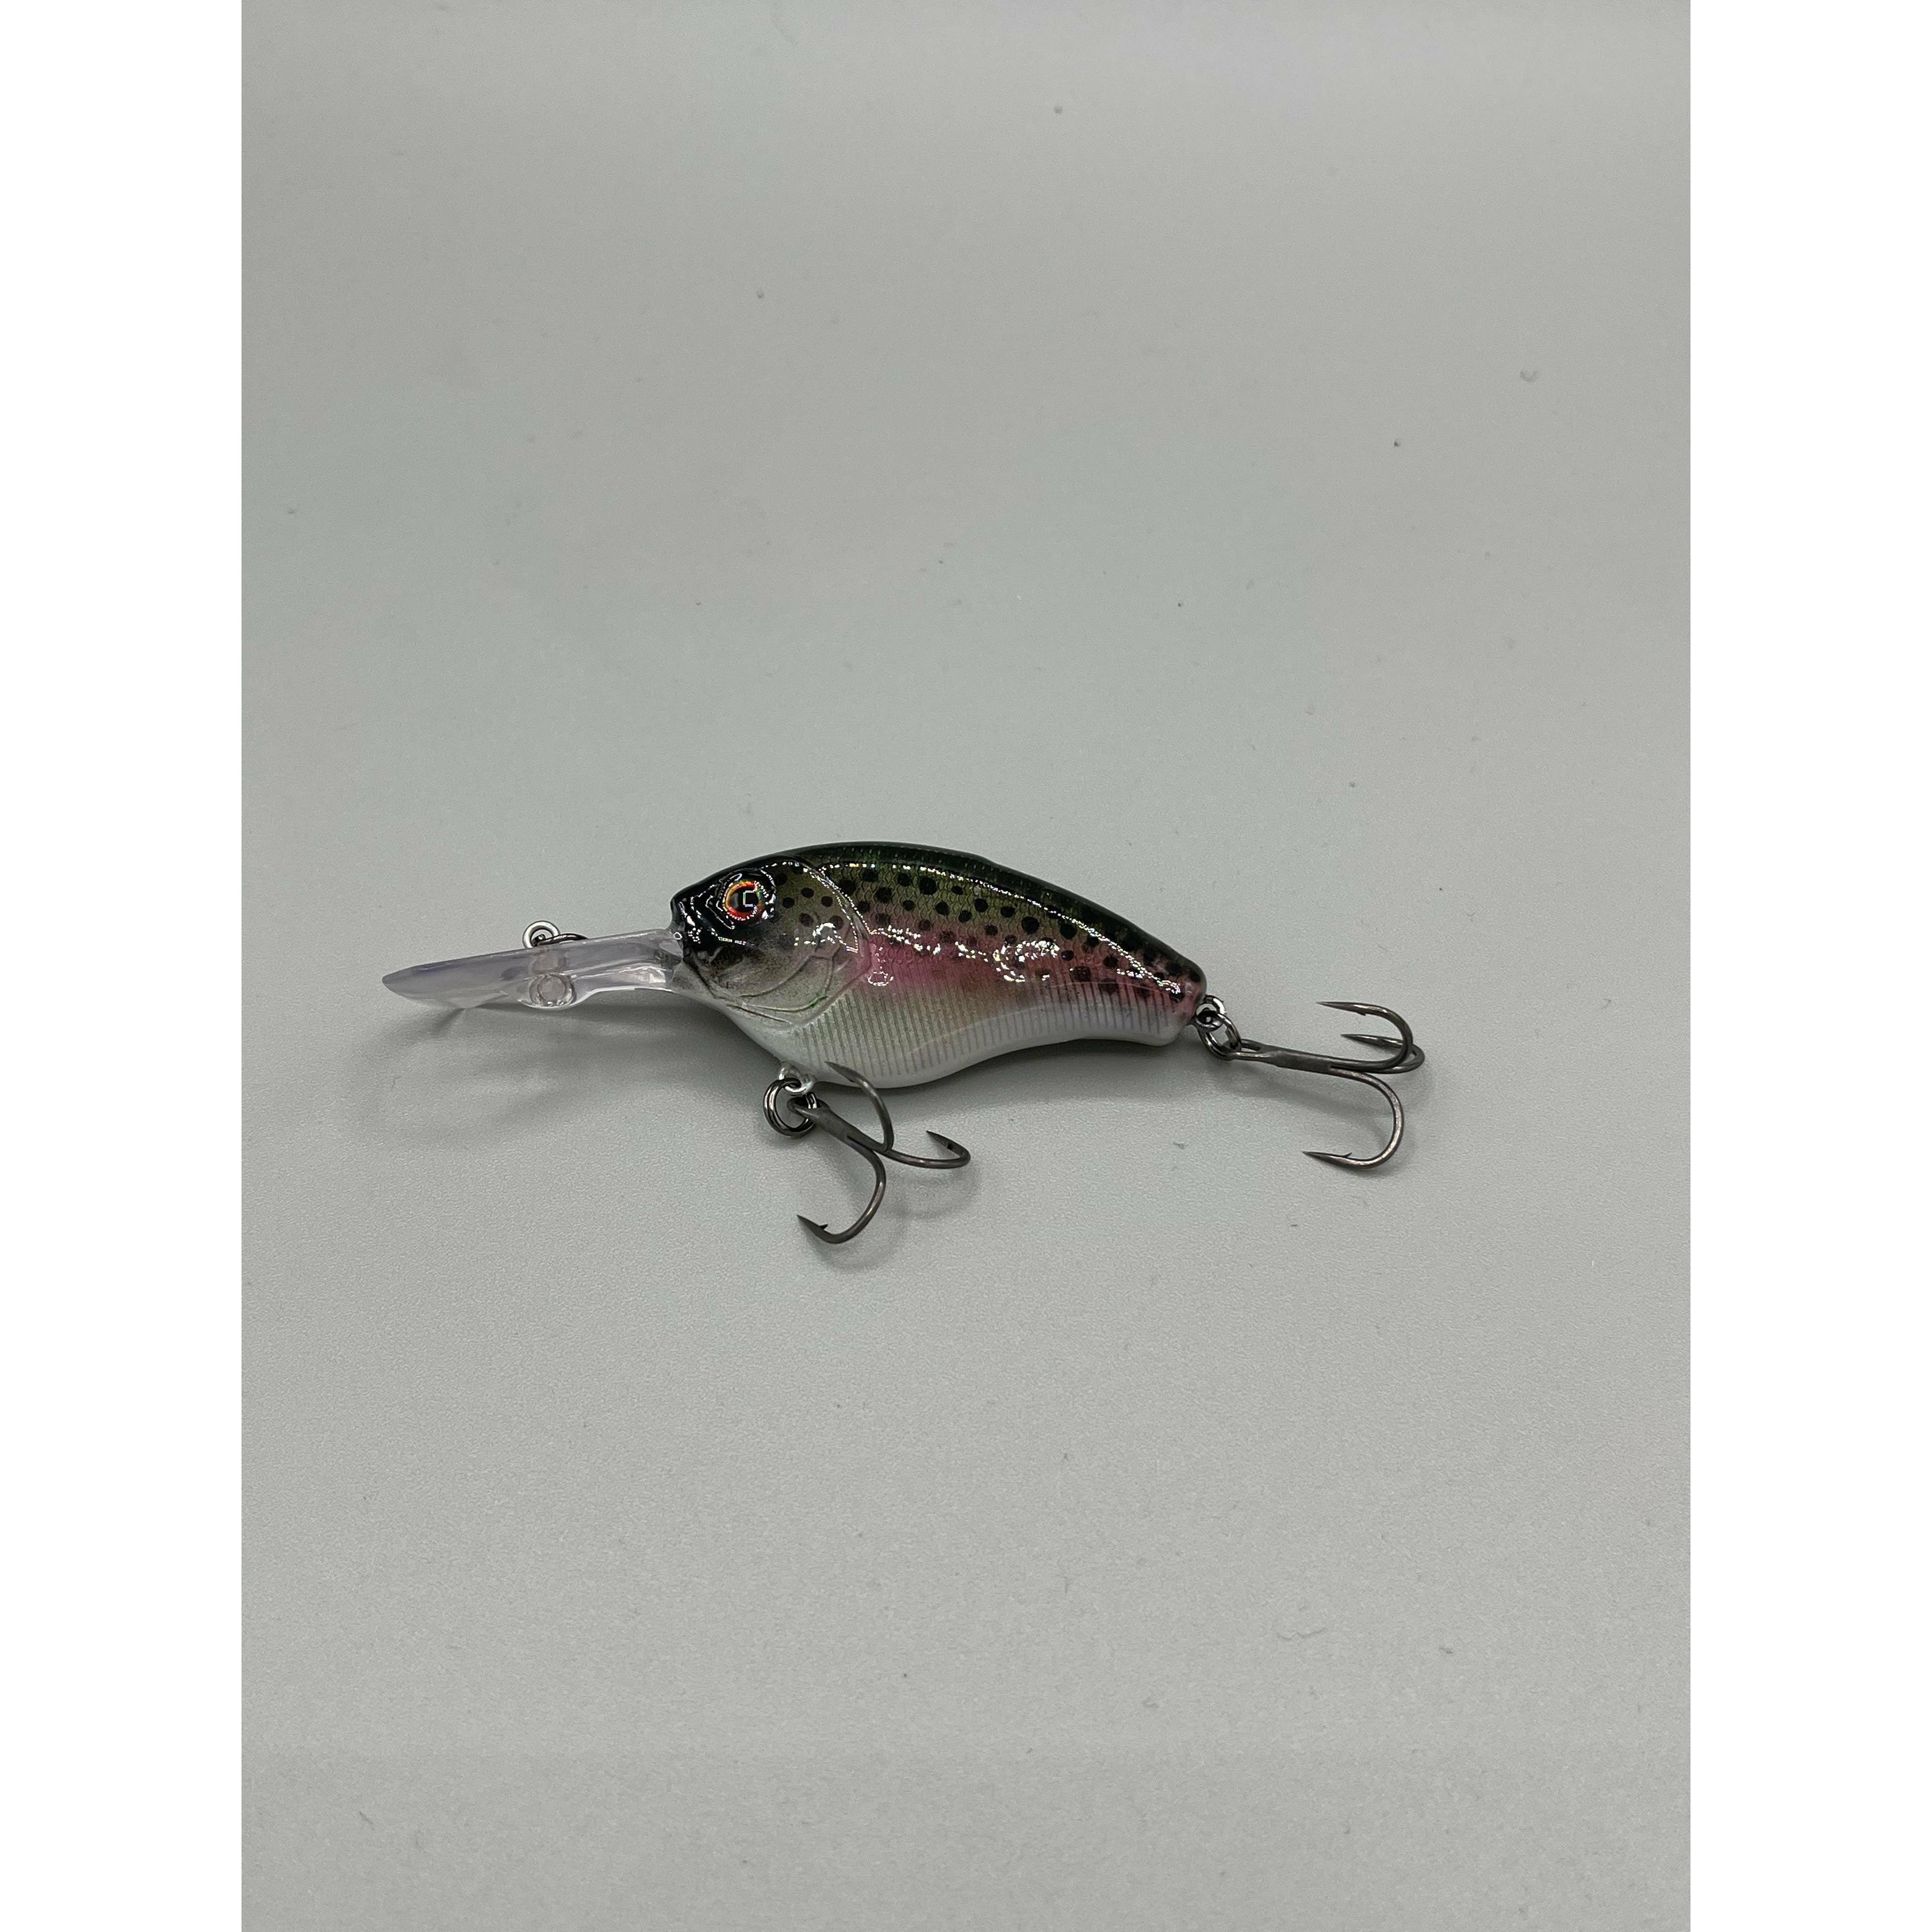 Buy flat-sided-trout WESTONS BIG TIMIN CUSTOM LURES CRANKBAIT&#39;S